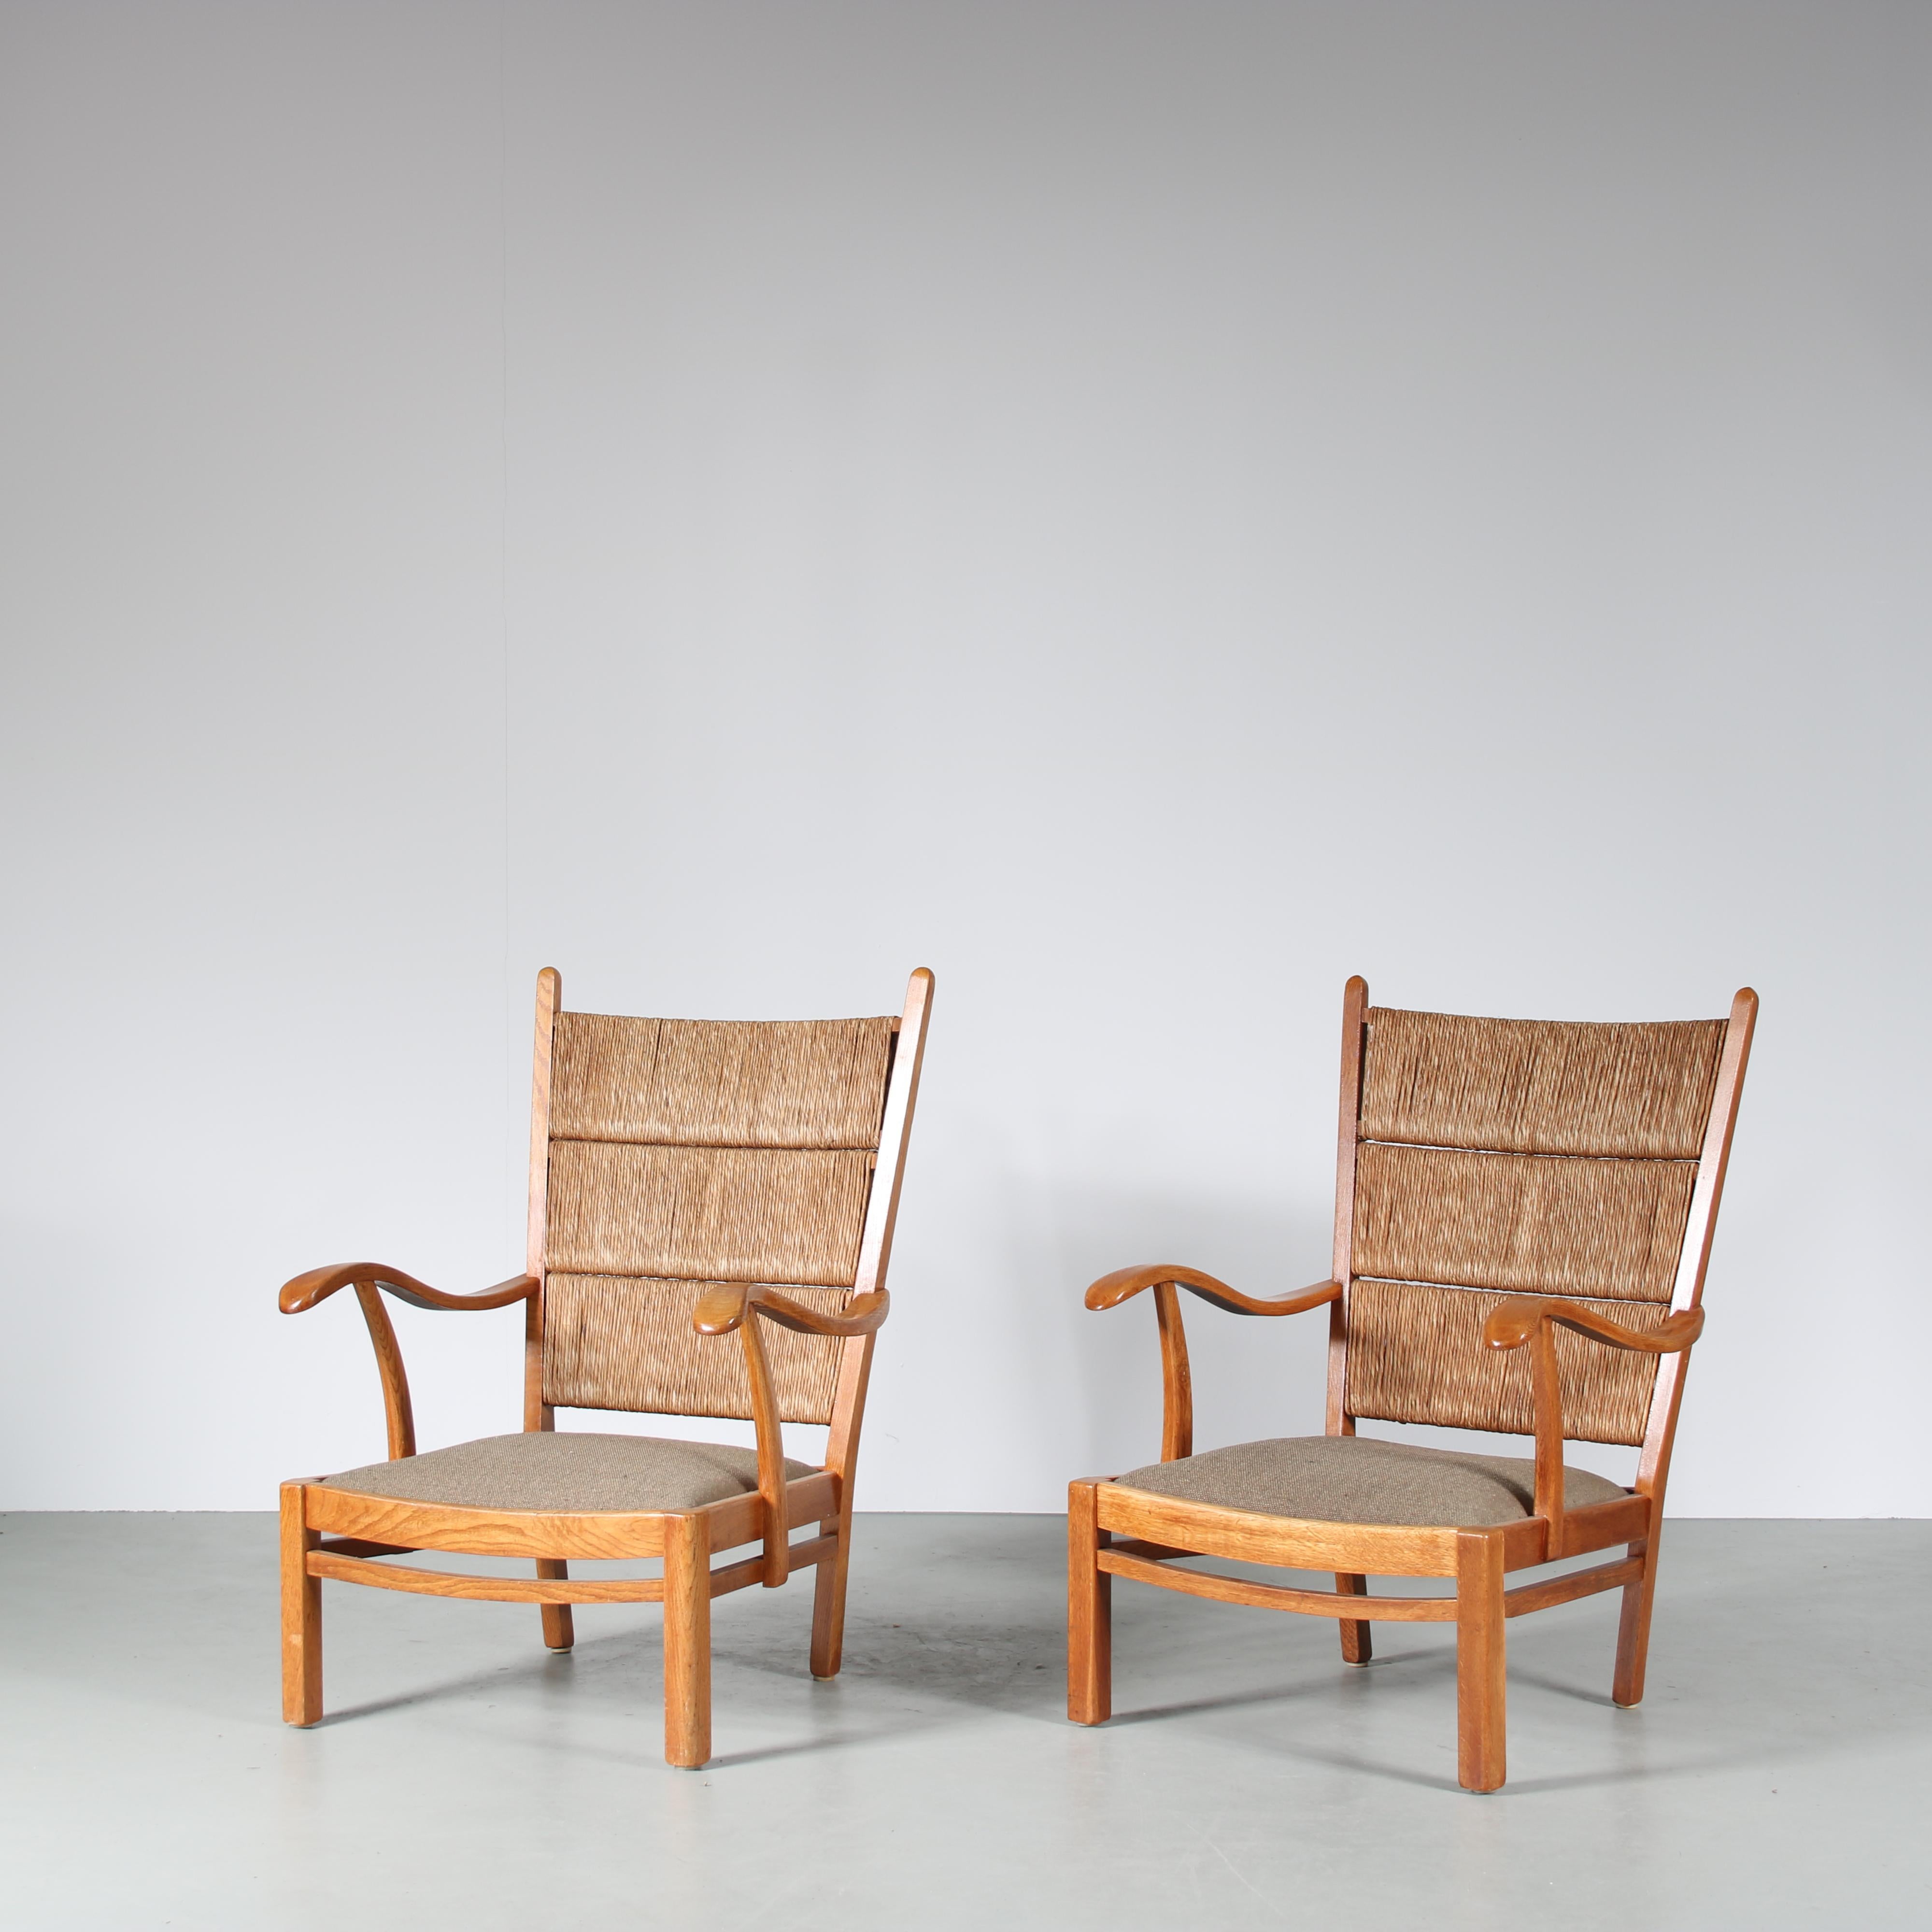 A beauitful pair of easy chairs designed by Bas van Pelt and manufactured by MyHome in the Netherlands around 1950.

Both chairs are made of beautiful quality oak wood. The seats are upholstered in fabric and the backrests and upholstered in rush,